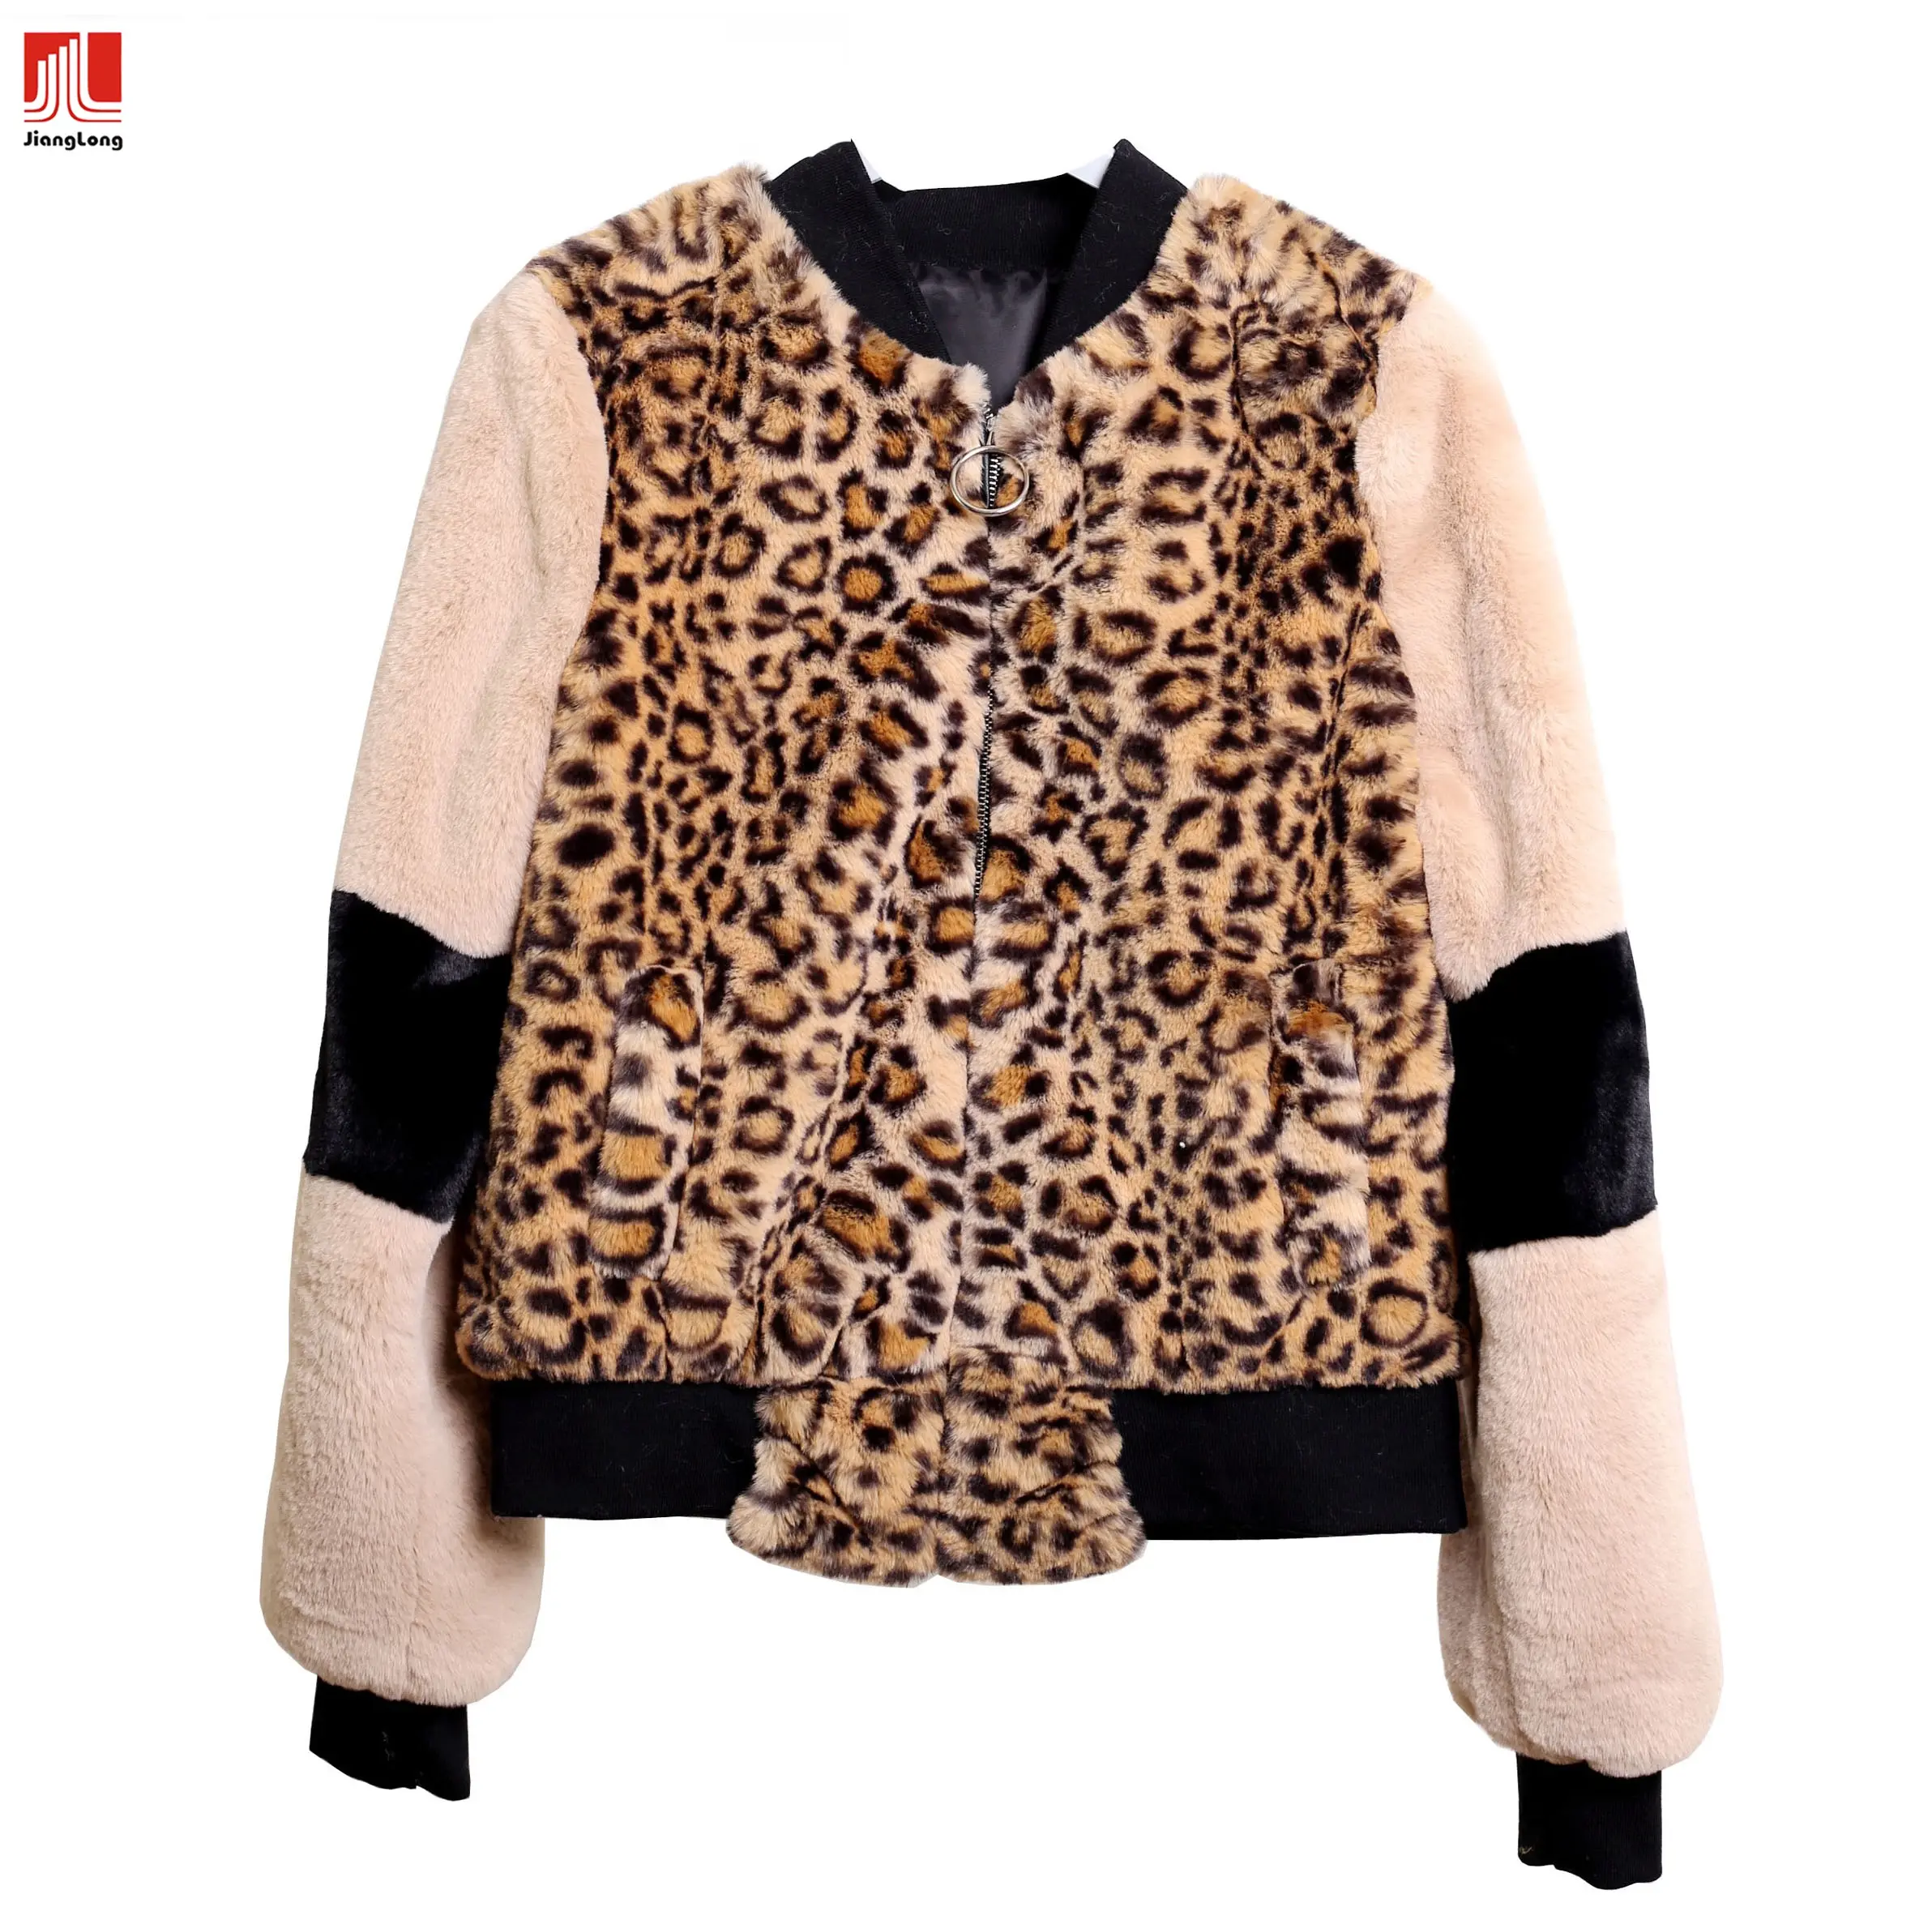 New designed ladise's faux fur solid and leopard animal printing baseball bomber jacket poncho